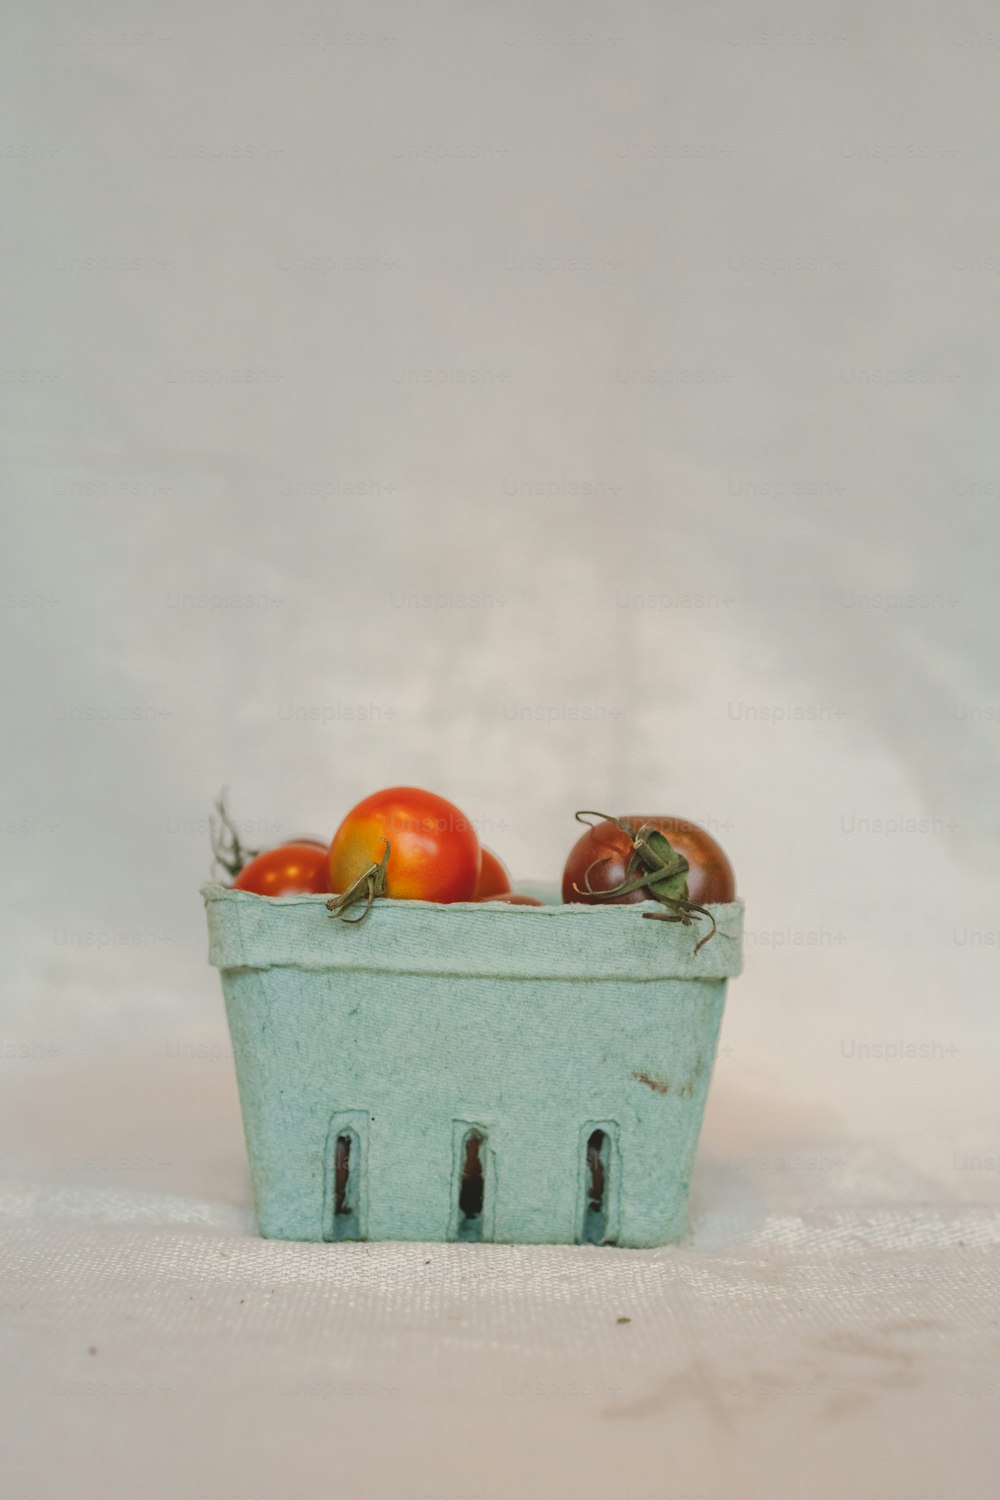 a blue basket filled with lots of tomatoes